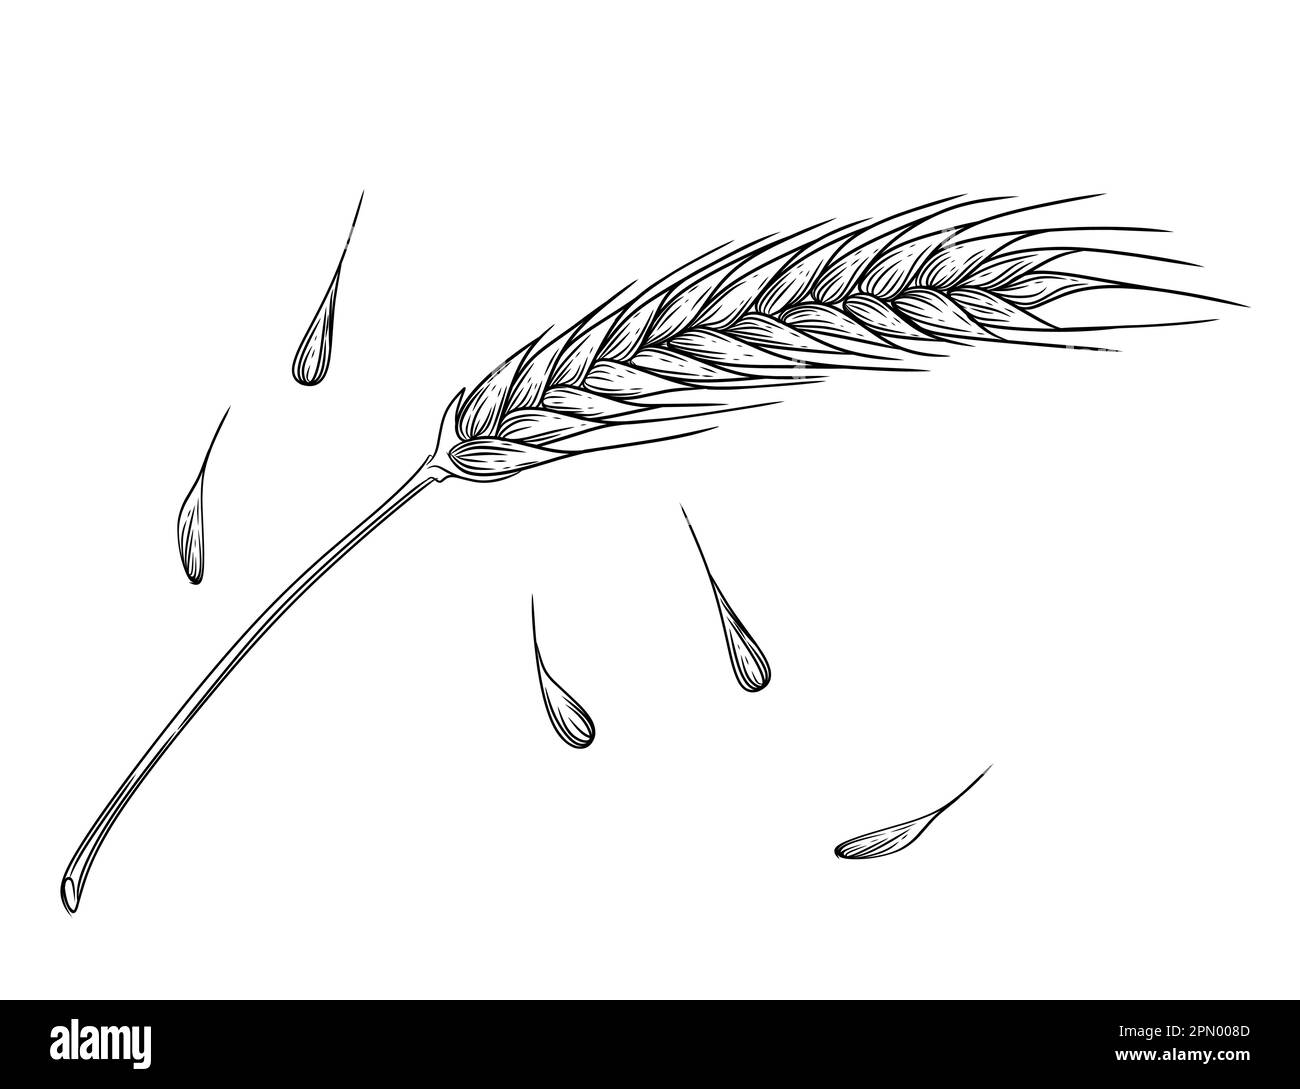 Outline sketch of wheat spikelets with ears grain and stem vector illustration on white background Stock Vector